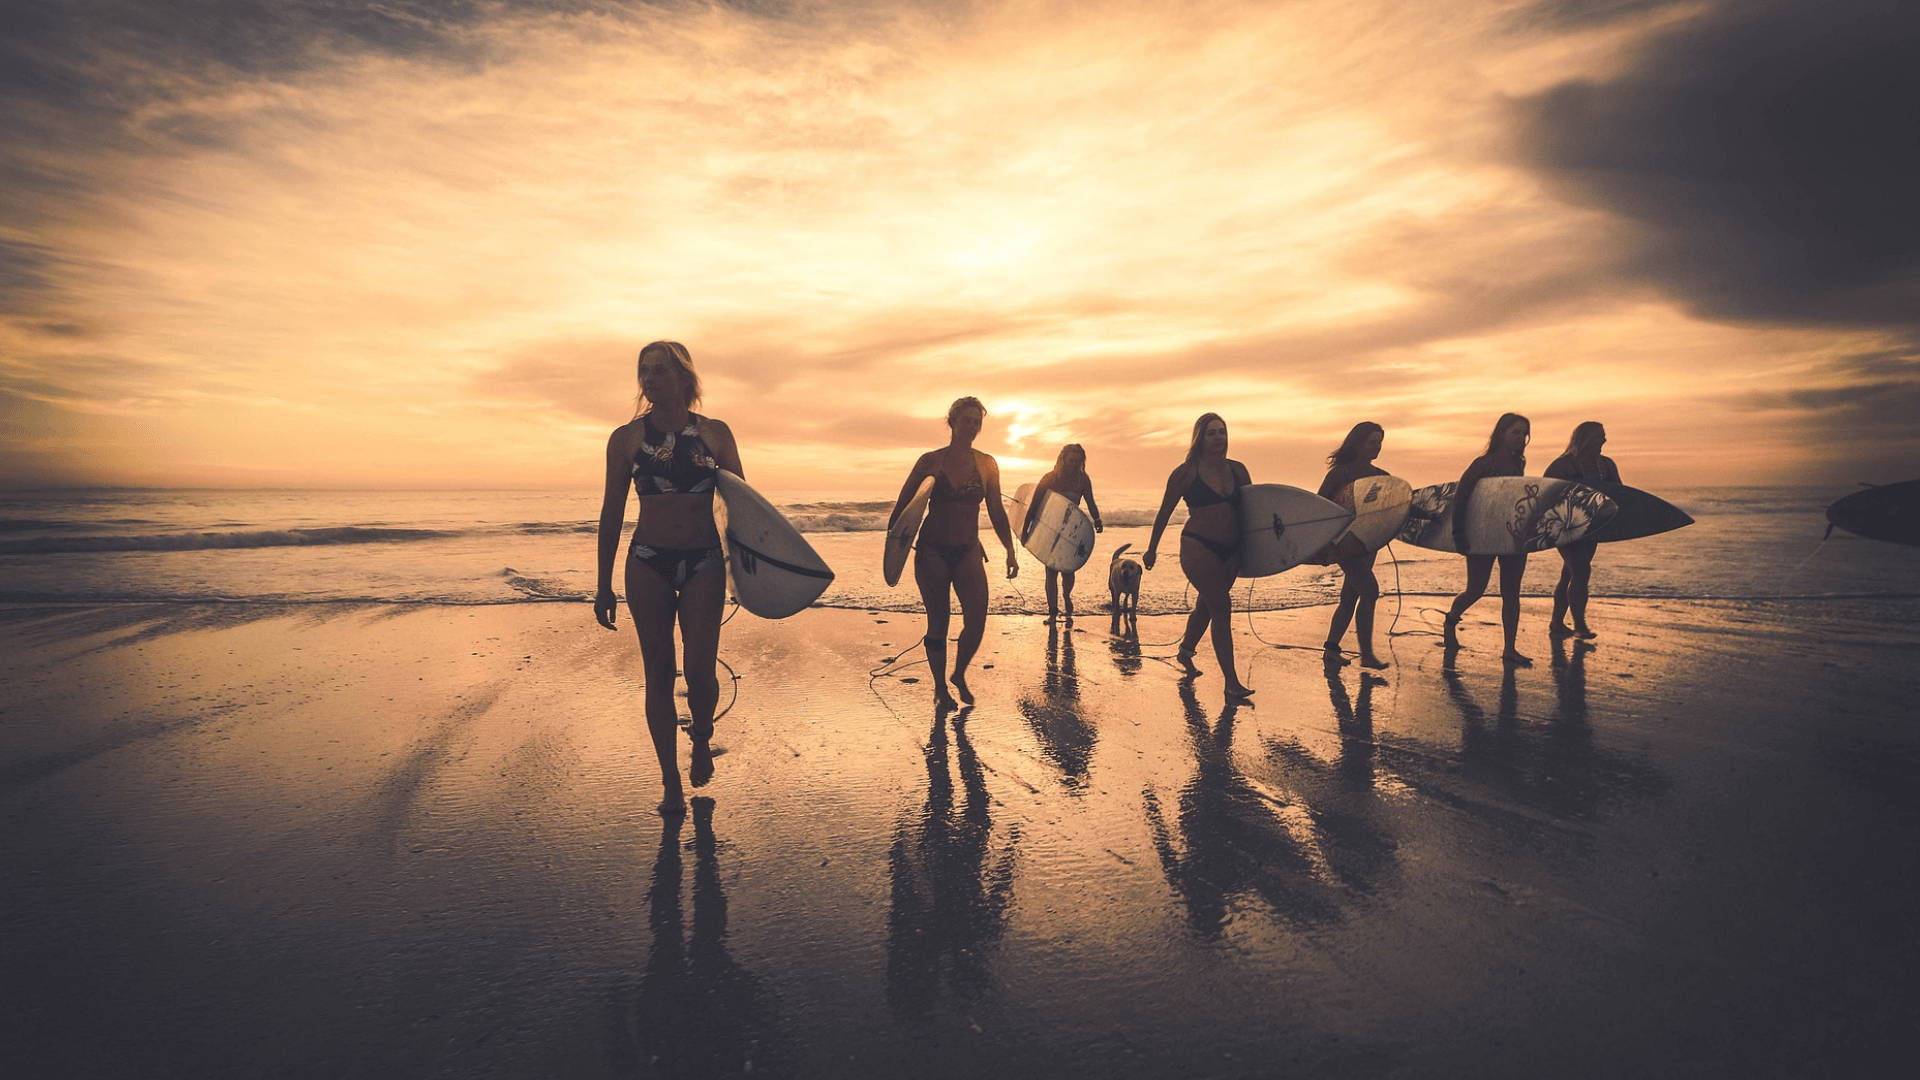 Women Surfers: Reclaiming the Waves